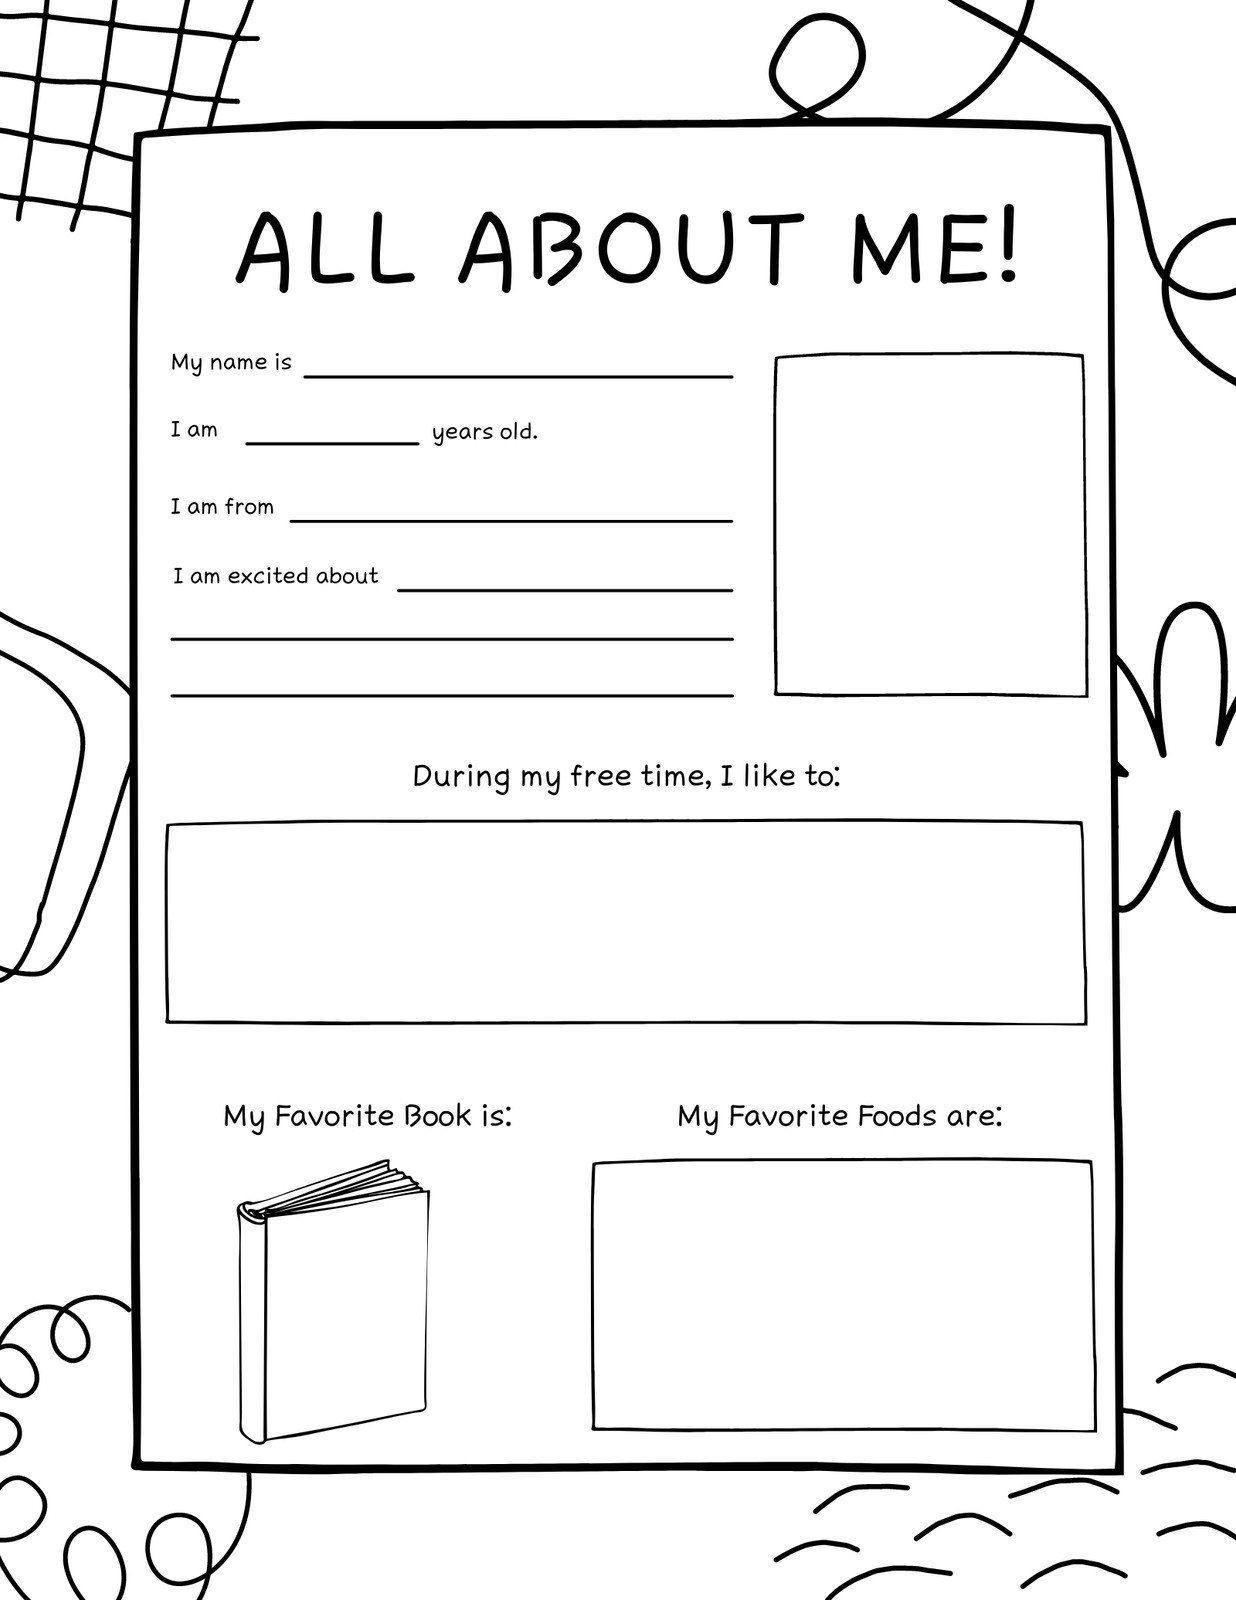 Free And Printable All About Me Worksheet Templates | Canva throughout All About Me Free Printable